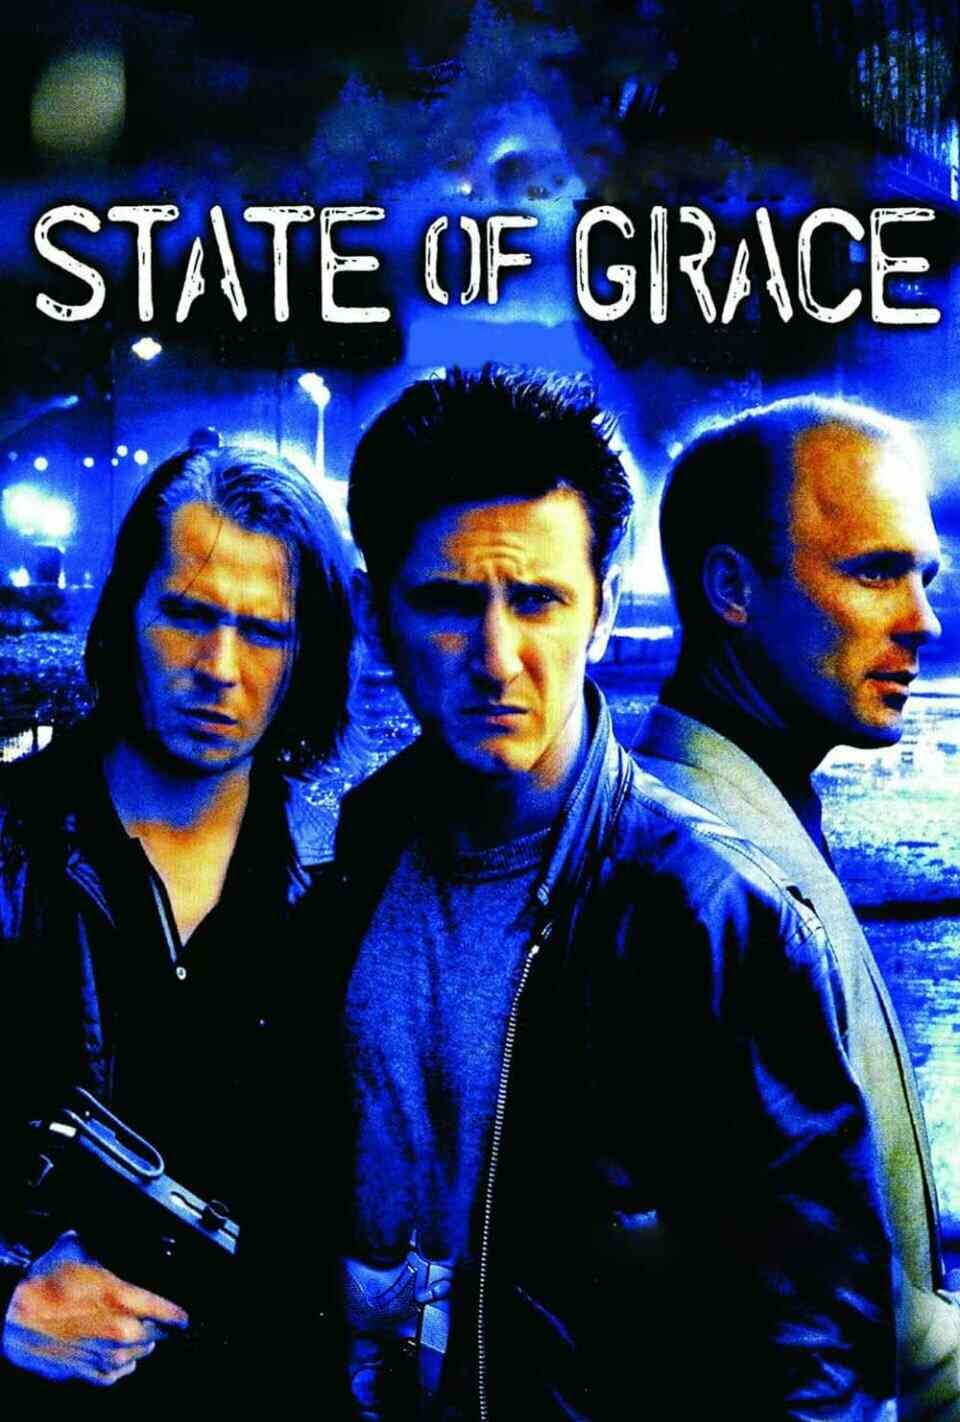 Read State of Grace screenplay (poster)